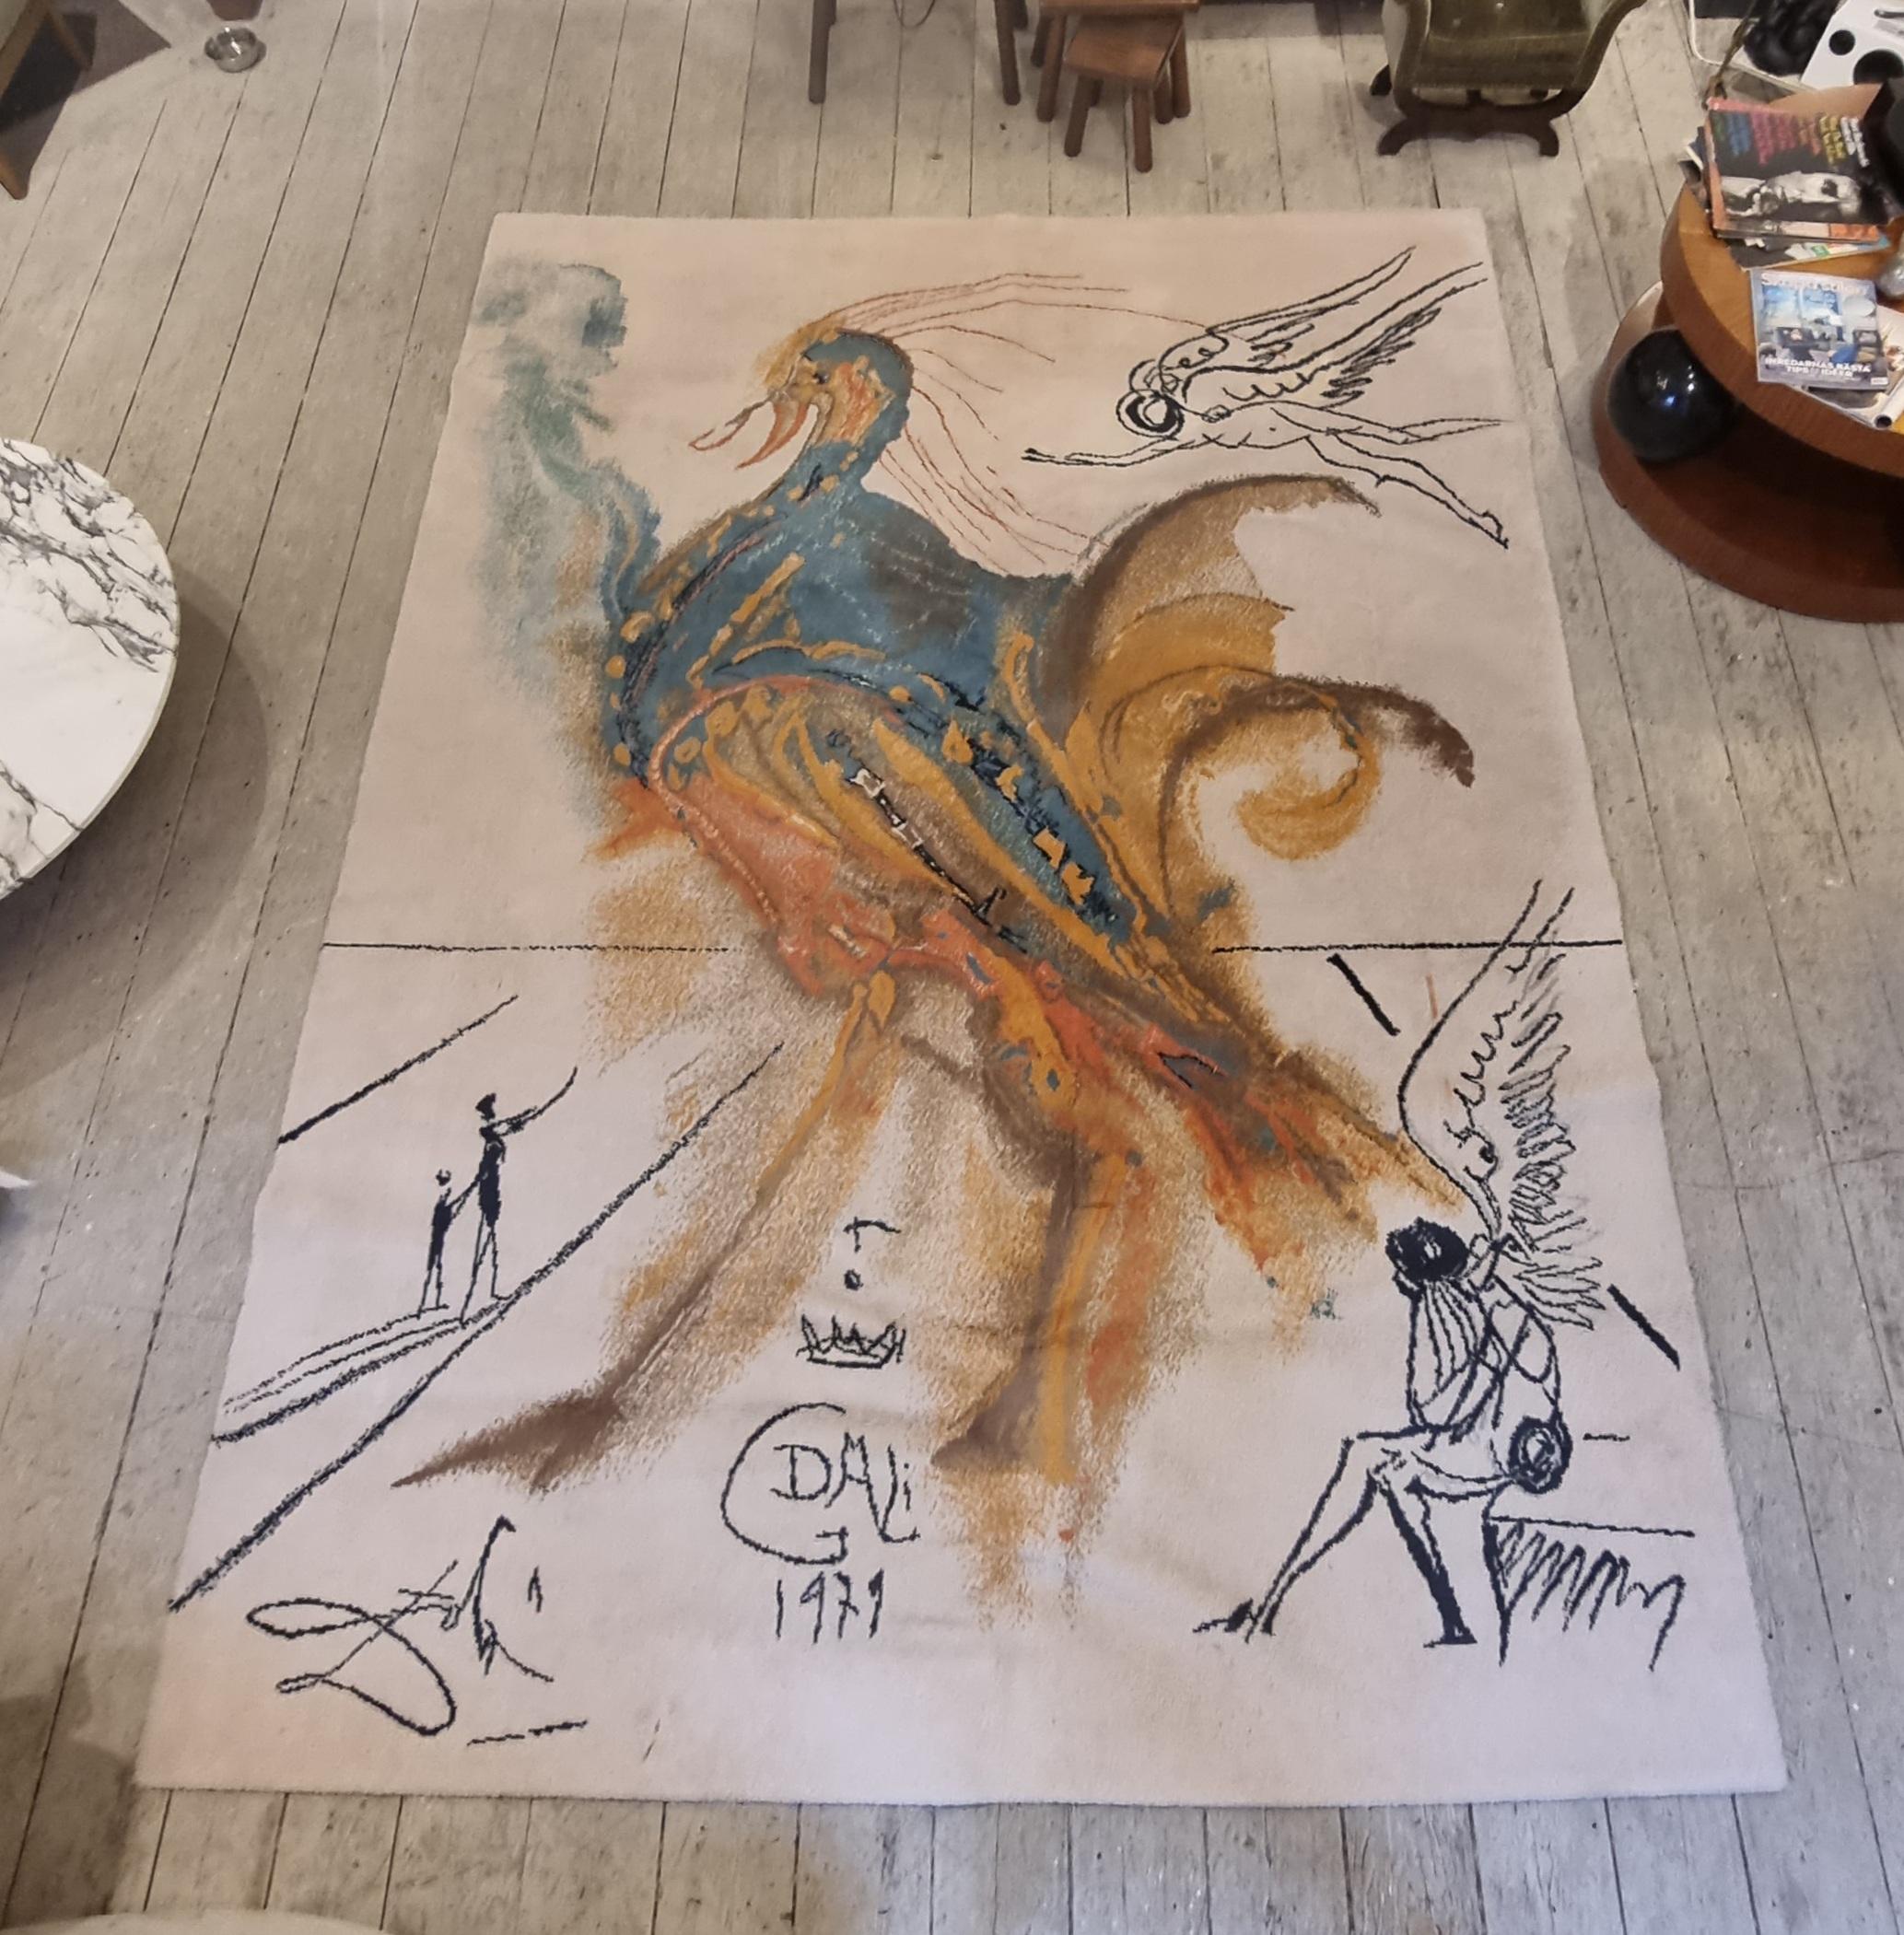 A rare, marvellous 100% wool carpet, from The 20th Century Masters Collection made in Denmark by Ege Art Line, based on designs by our most renowned artists. This design by Salvador Dalí (Spain, 1904-1989),  